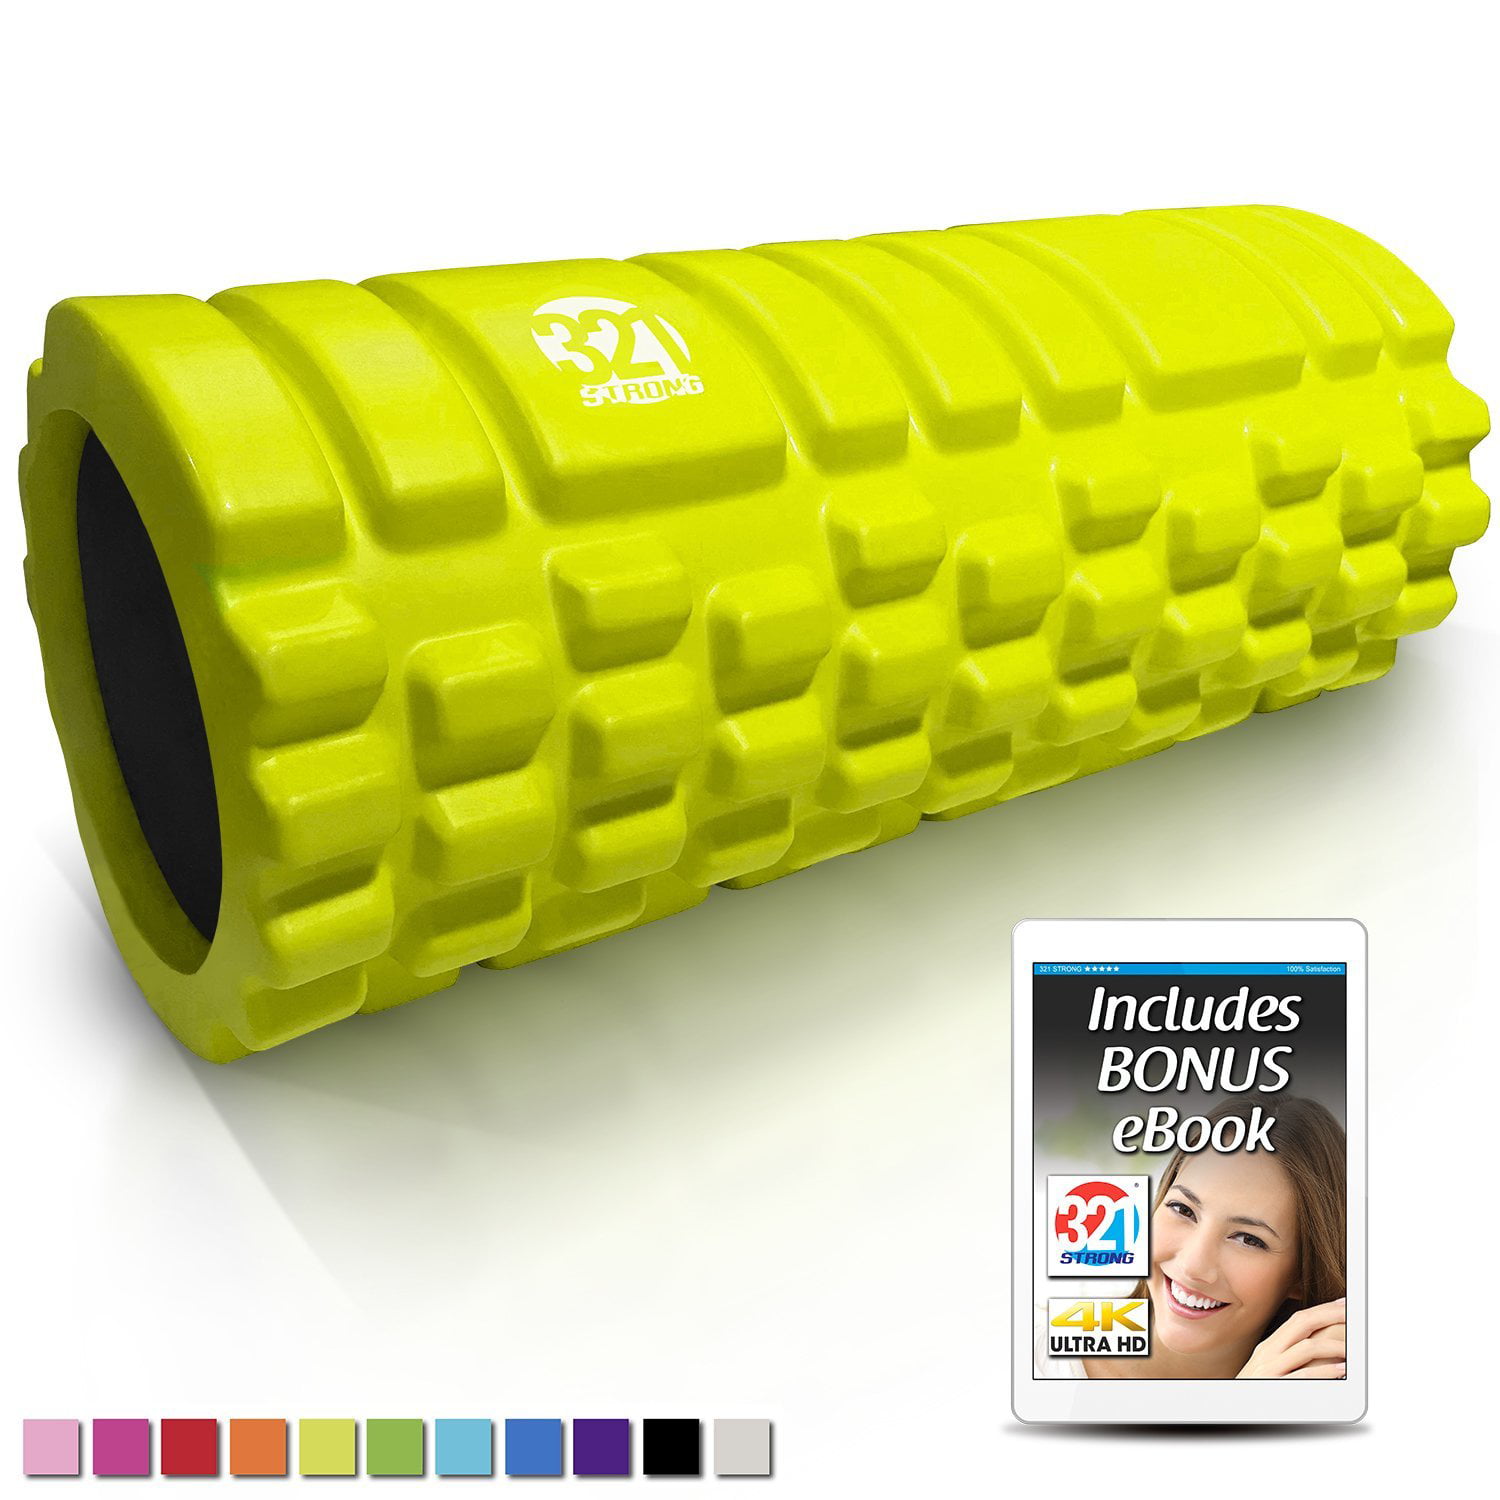 Medium Density Deep Tissue Massager for Muscle Massage and Myofascial Trigger Point Release with 4K eBook 321 STRONG Foam Roller 